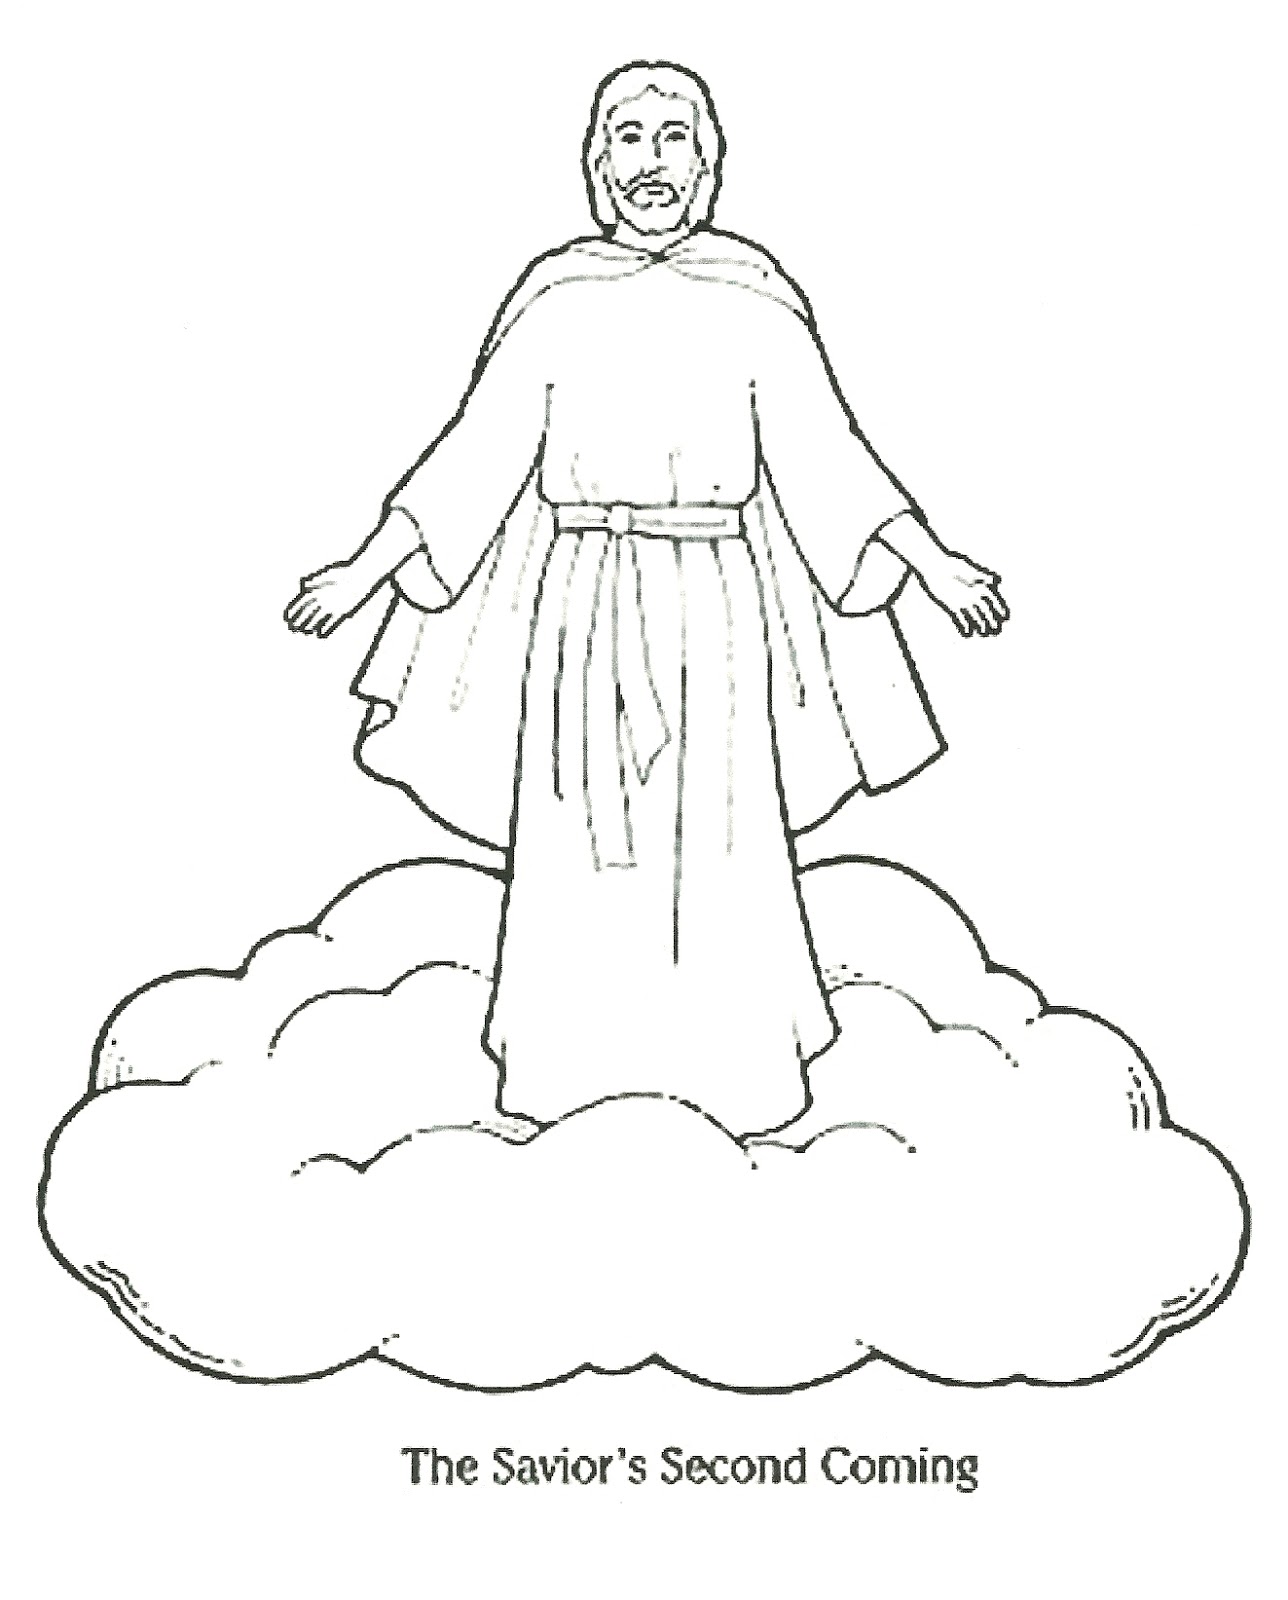 Following Jesus Coloring Page Sketch Coloring Page